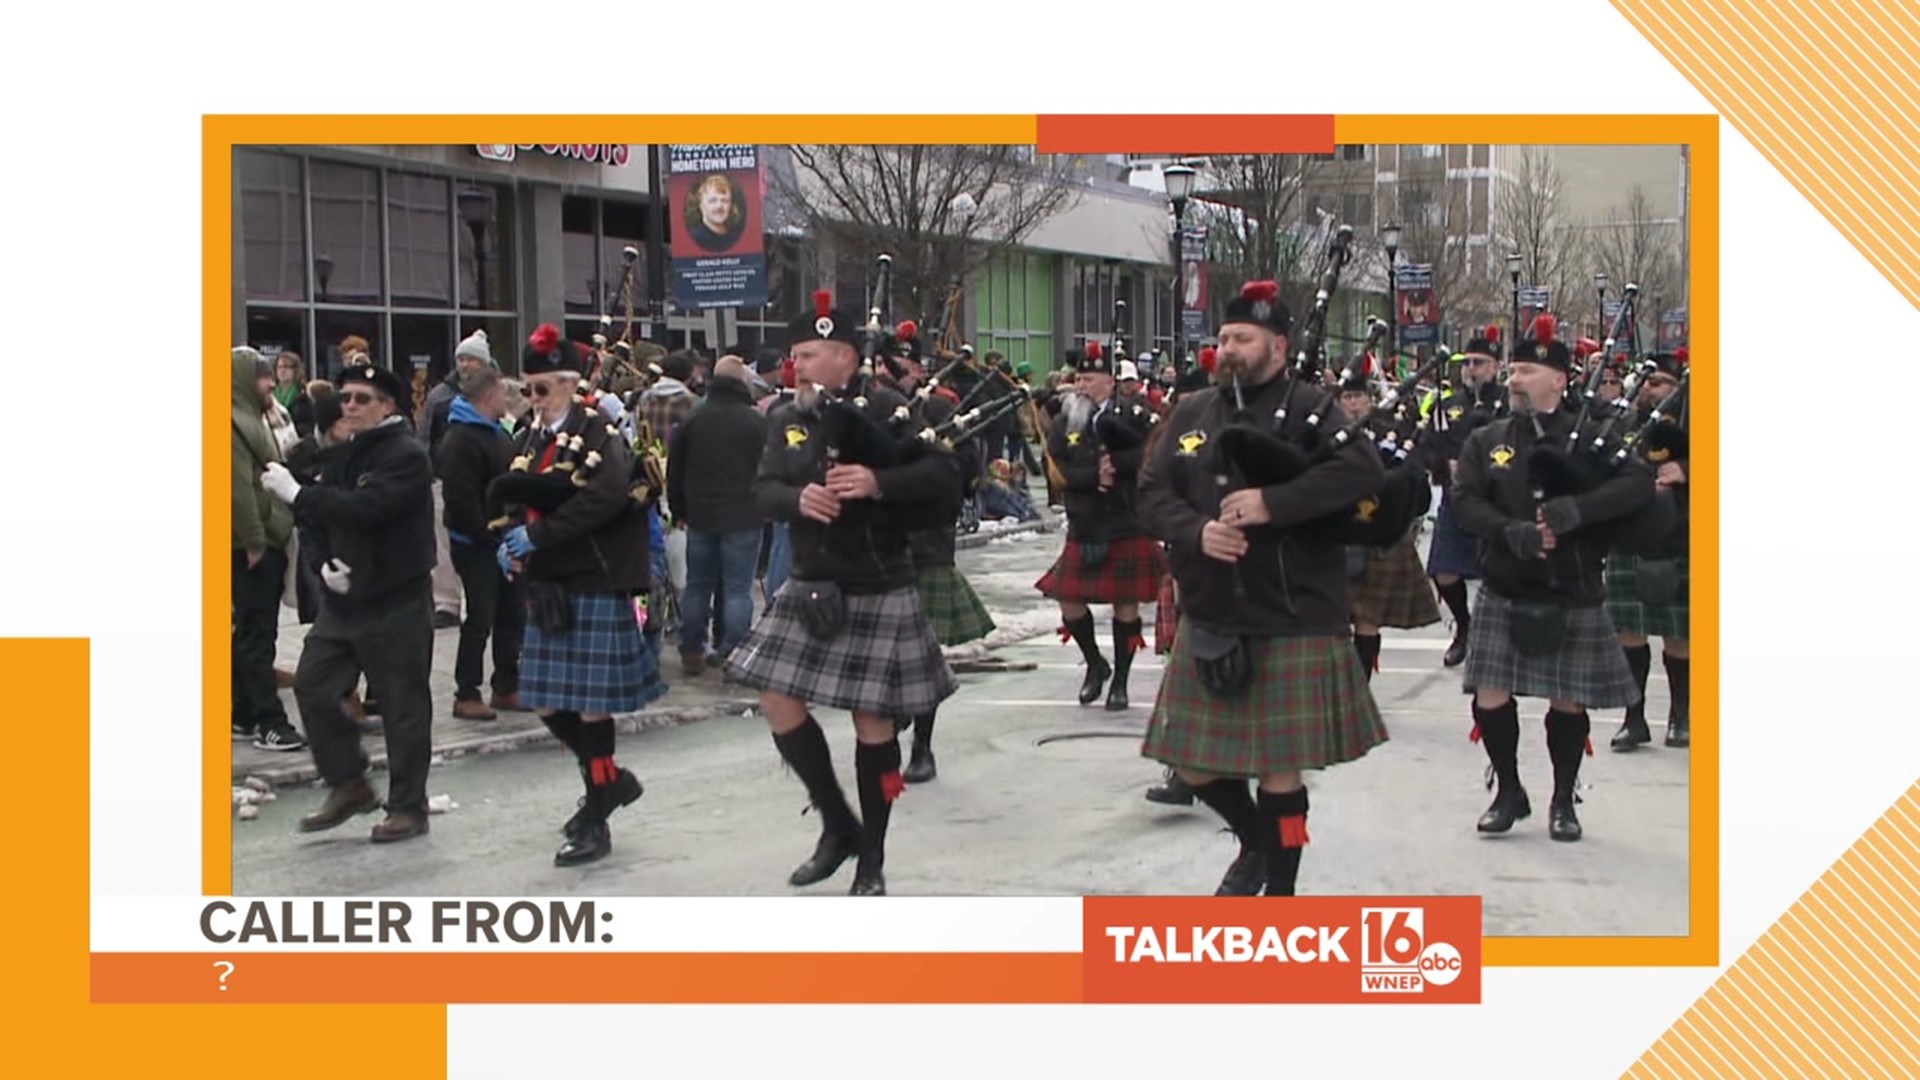 Nearly all the calls are about the St. Patrick's parades in Wilkes-Barre and Scranton.